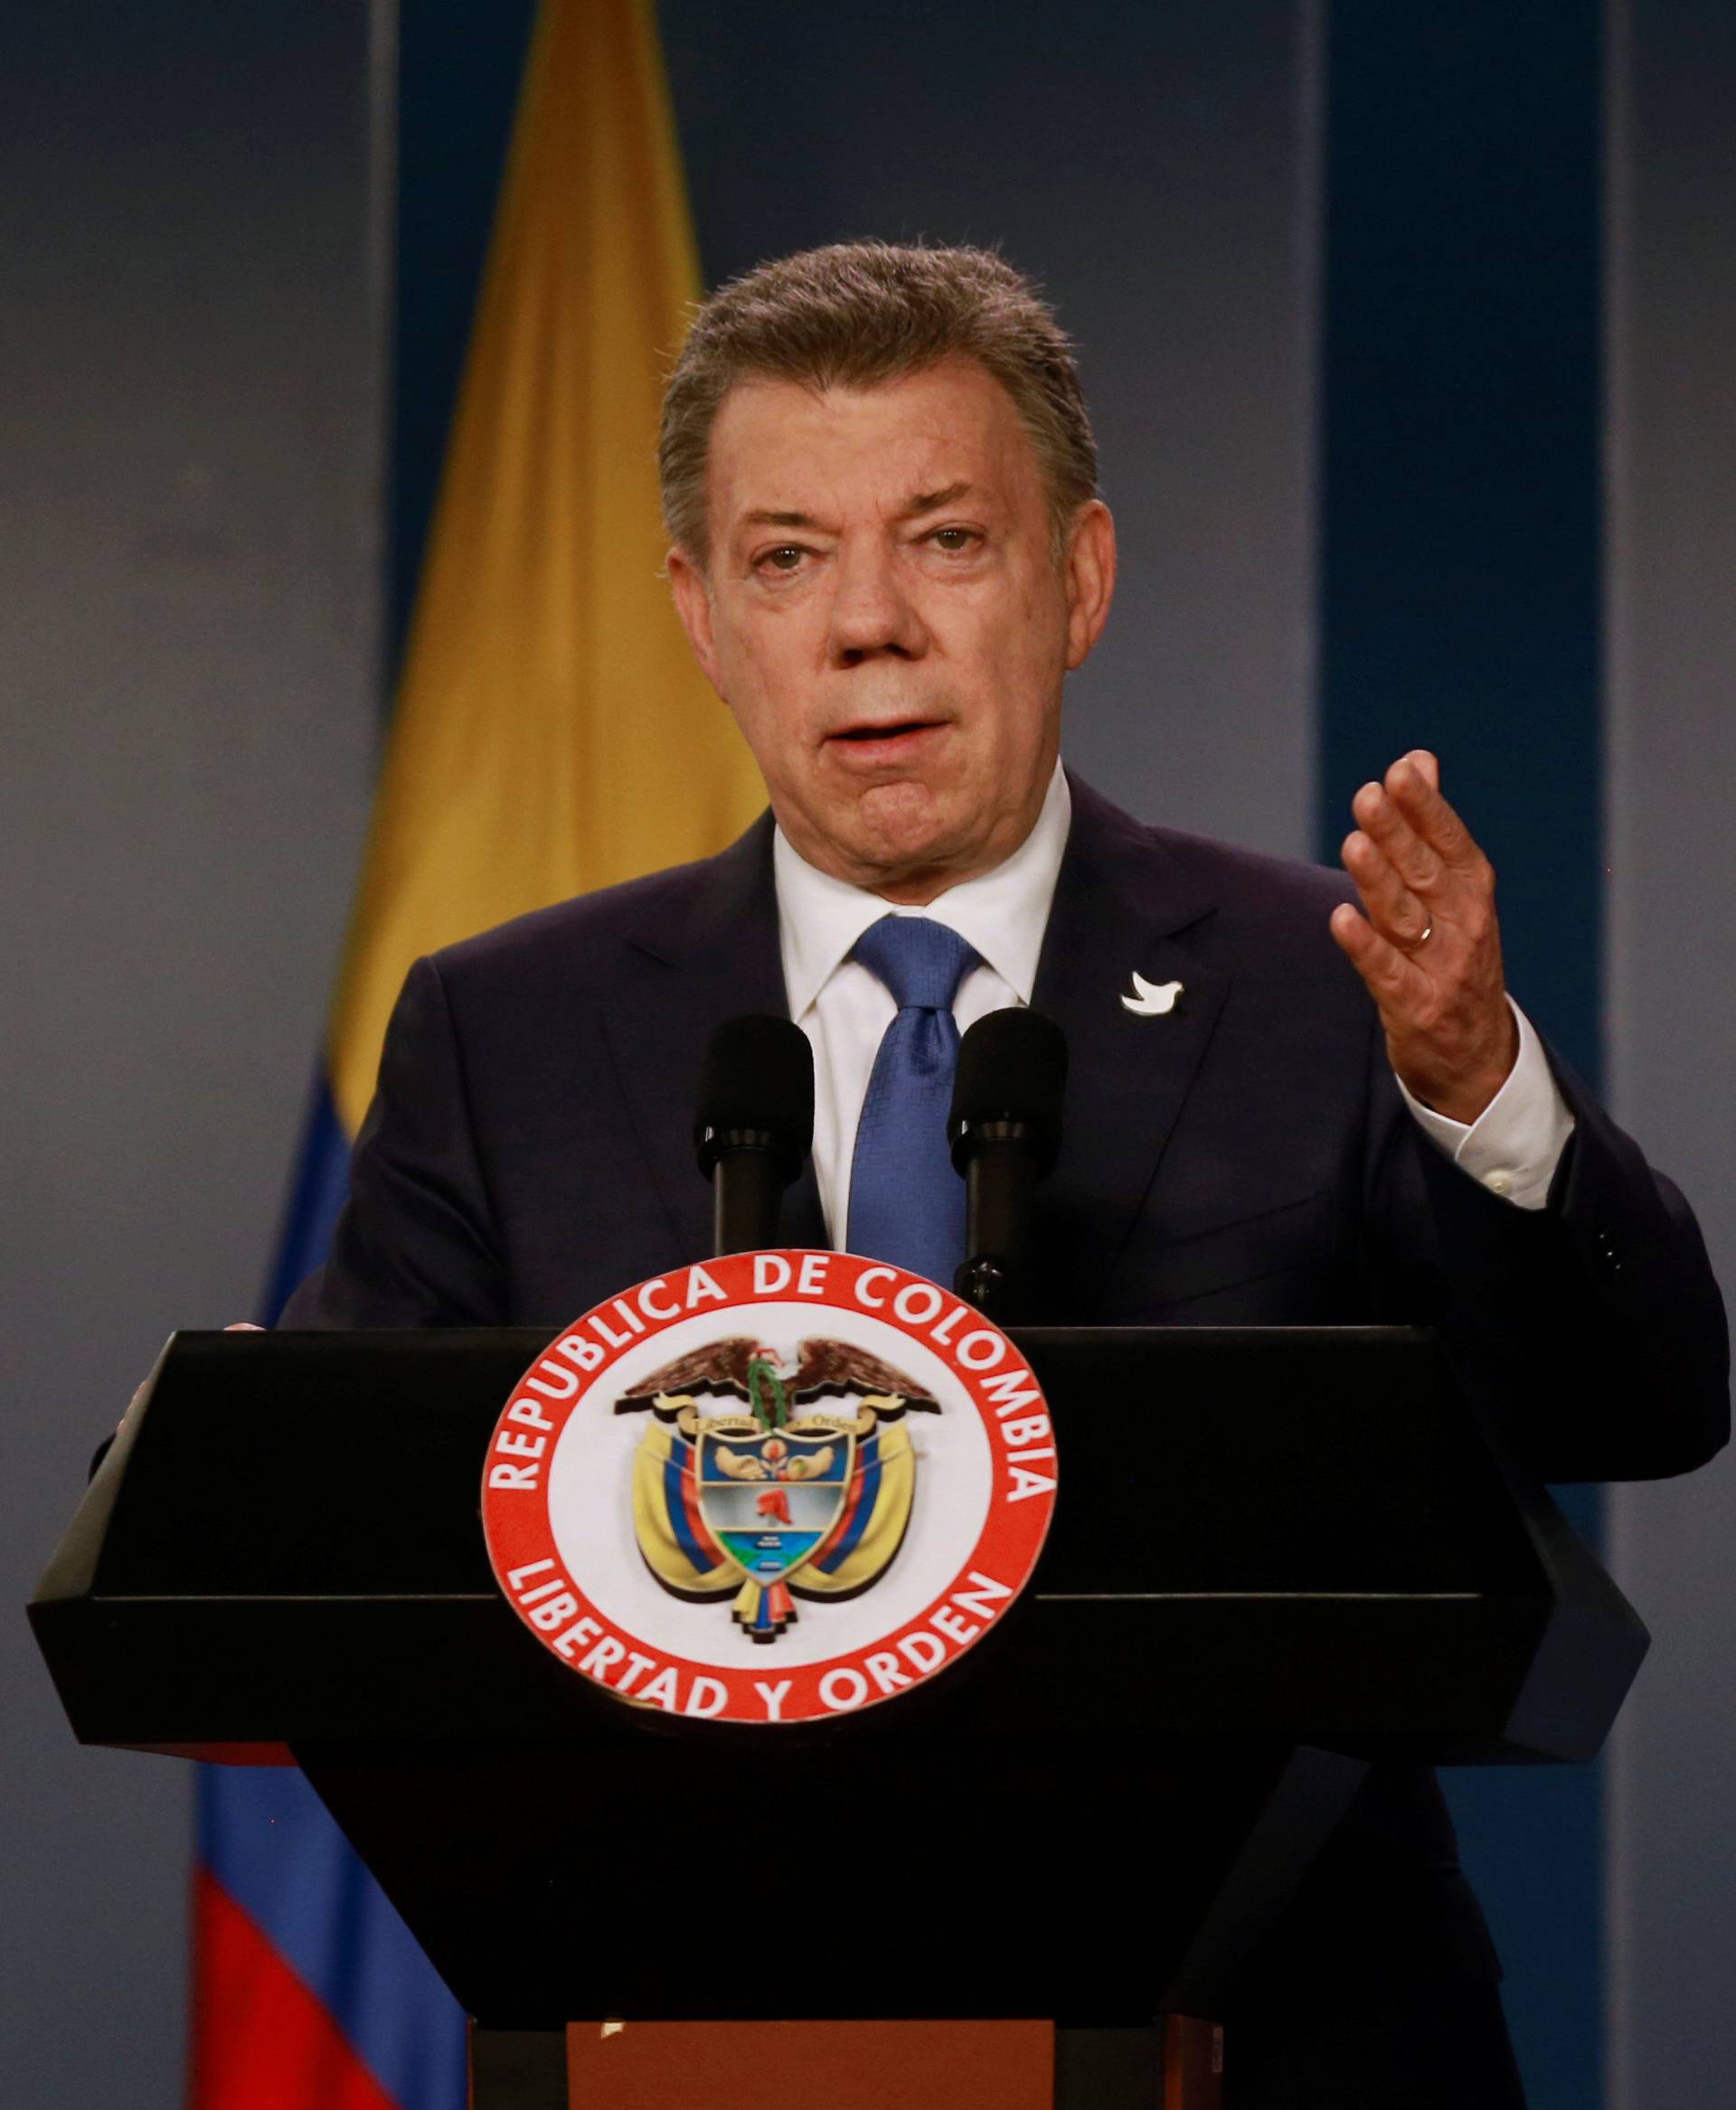 Colombia's President Santos talks during a news conference after a meeting with Colombian former President and Senator Uribe at Narino Palace in Bogota, Colombia